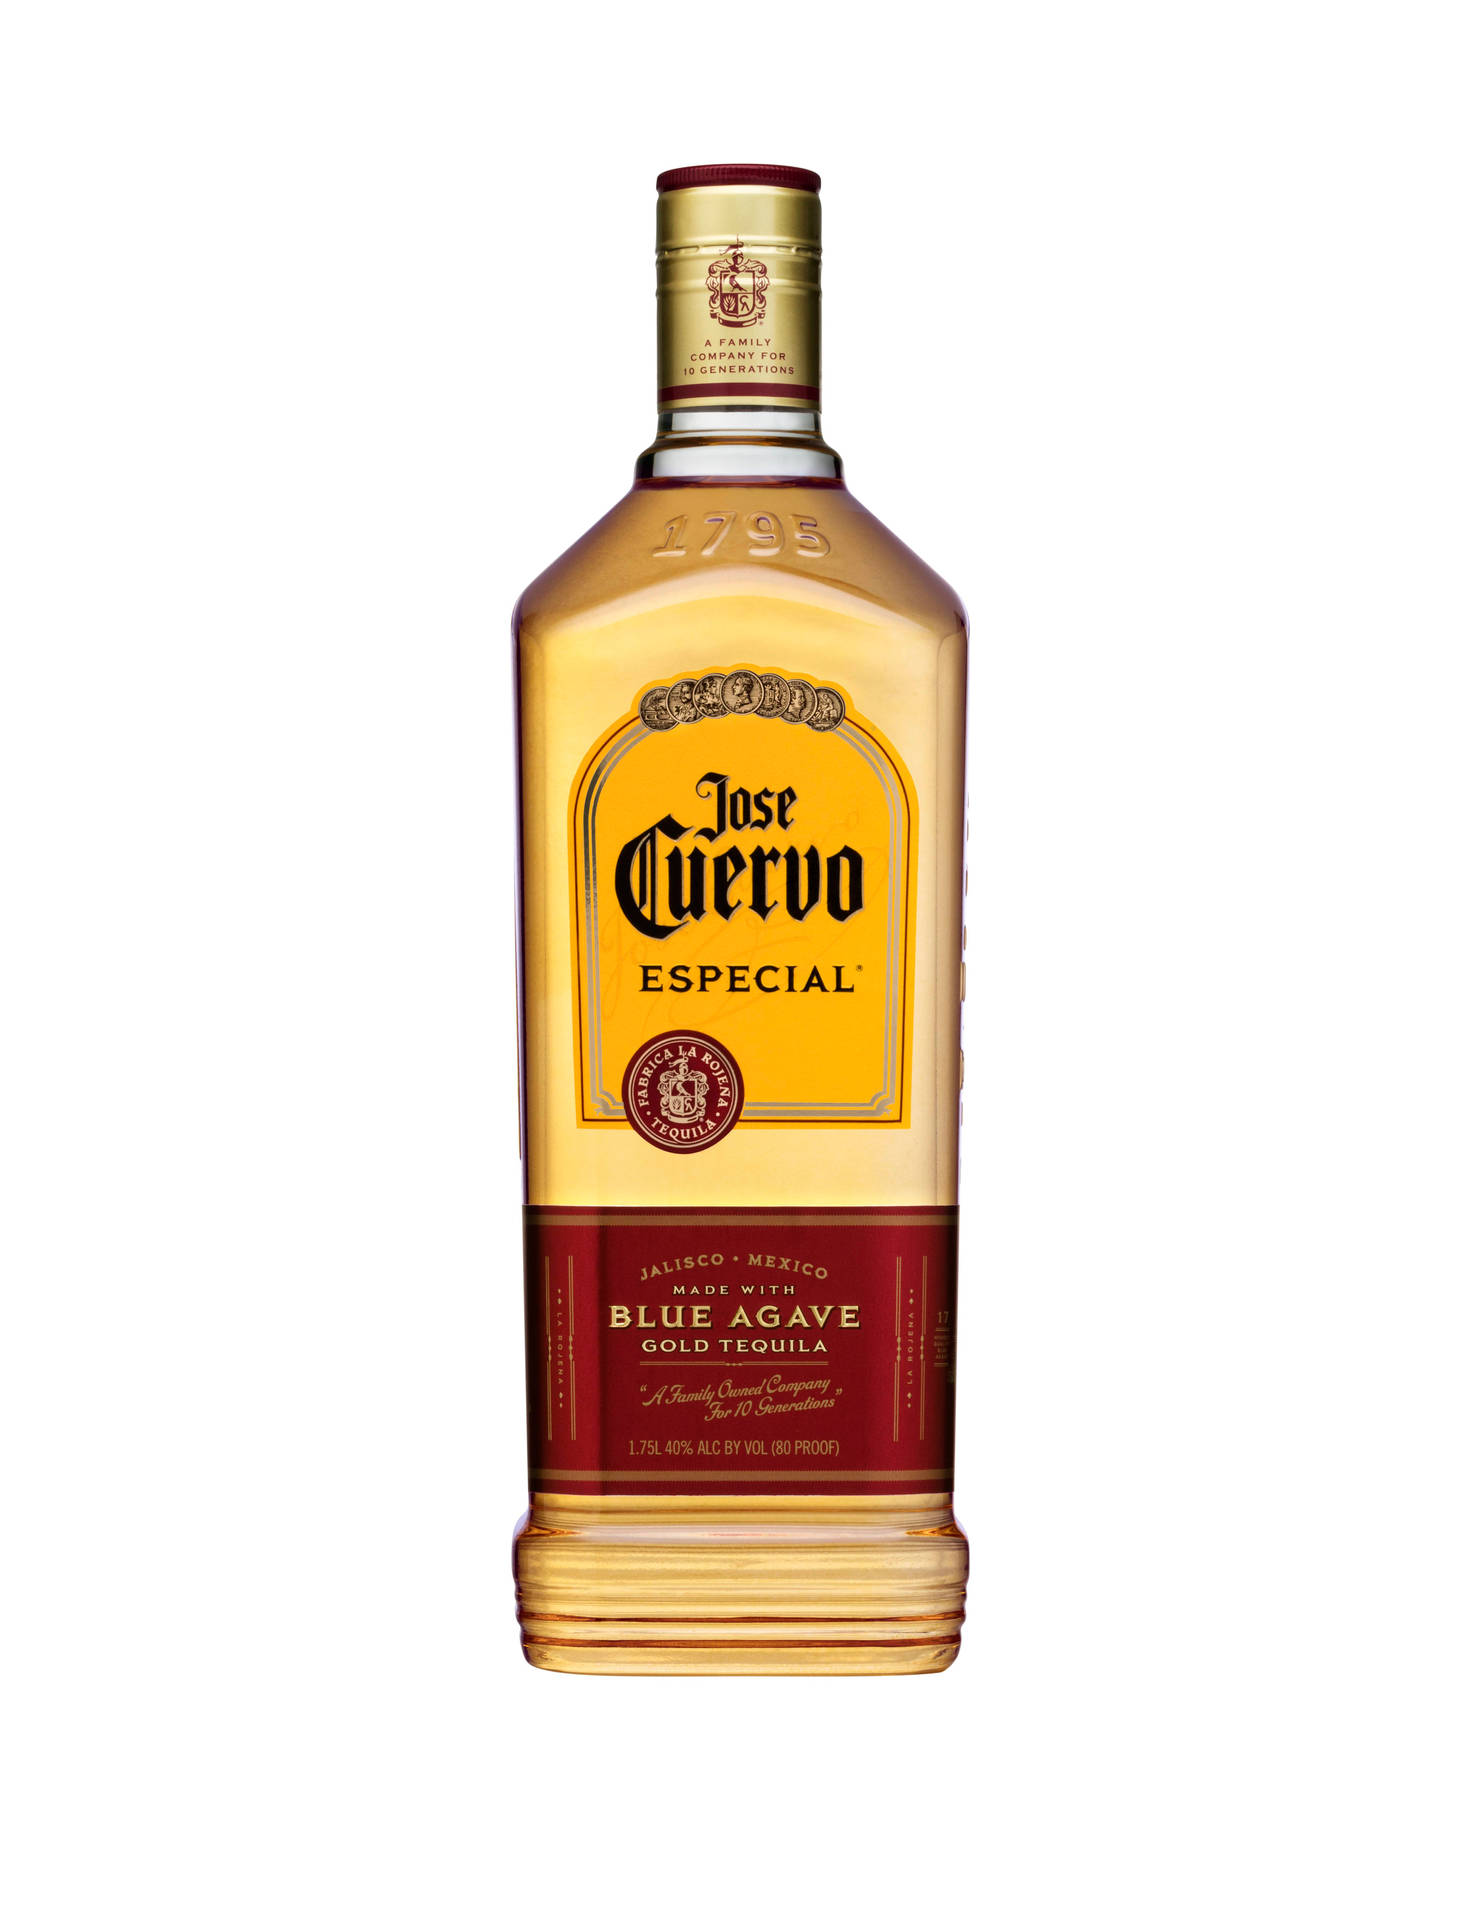 The exceptional Jose Cuervo - created from Blue Agave Wallpaper